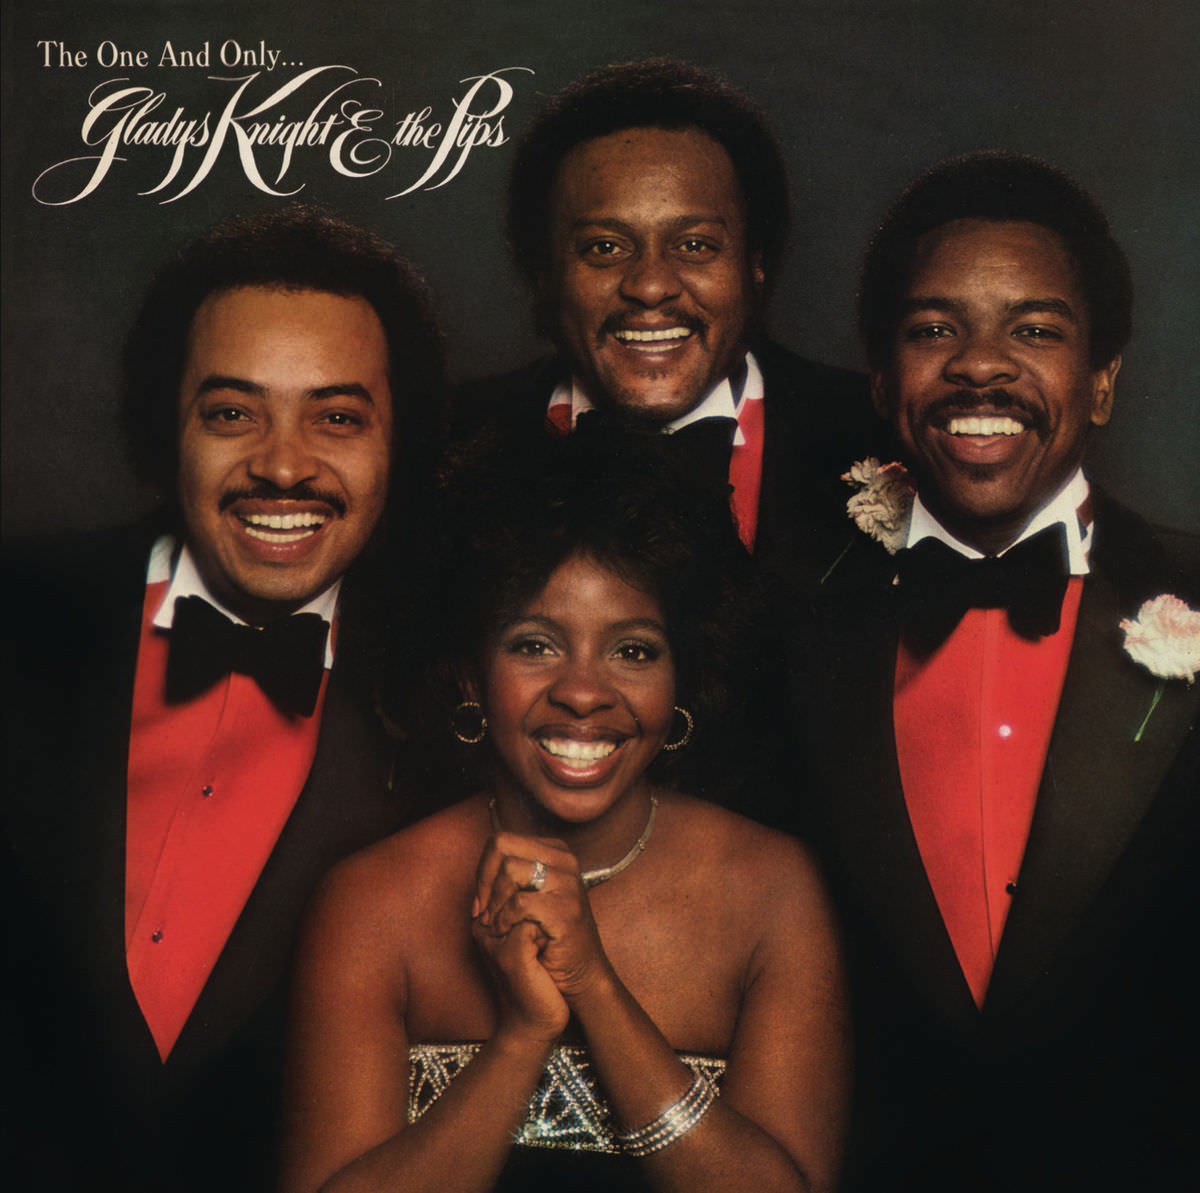 Gladys Knight & The Pips - The One And Only (1978/2015) {Expanded Edition 2014} [FLAC 24bit/96kHz]